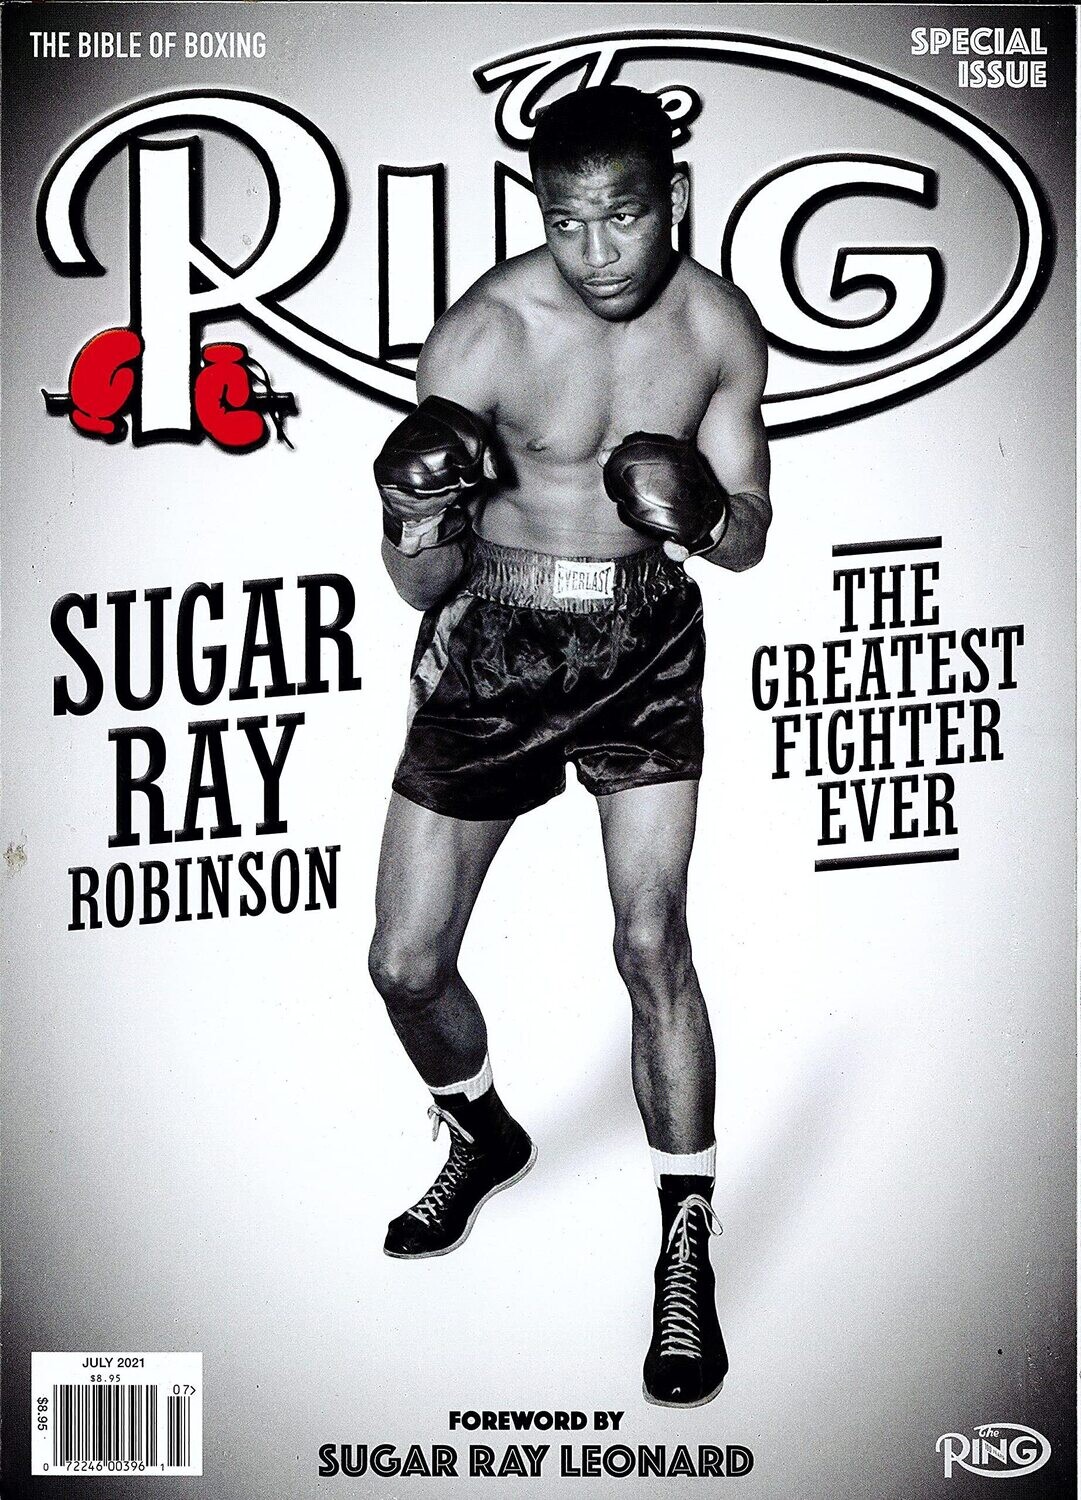 THE RING MAGAZINE SPECIAL ISSUE JULY 2021 - SUGAR RAY ROBINSON